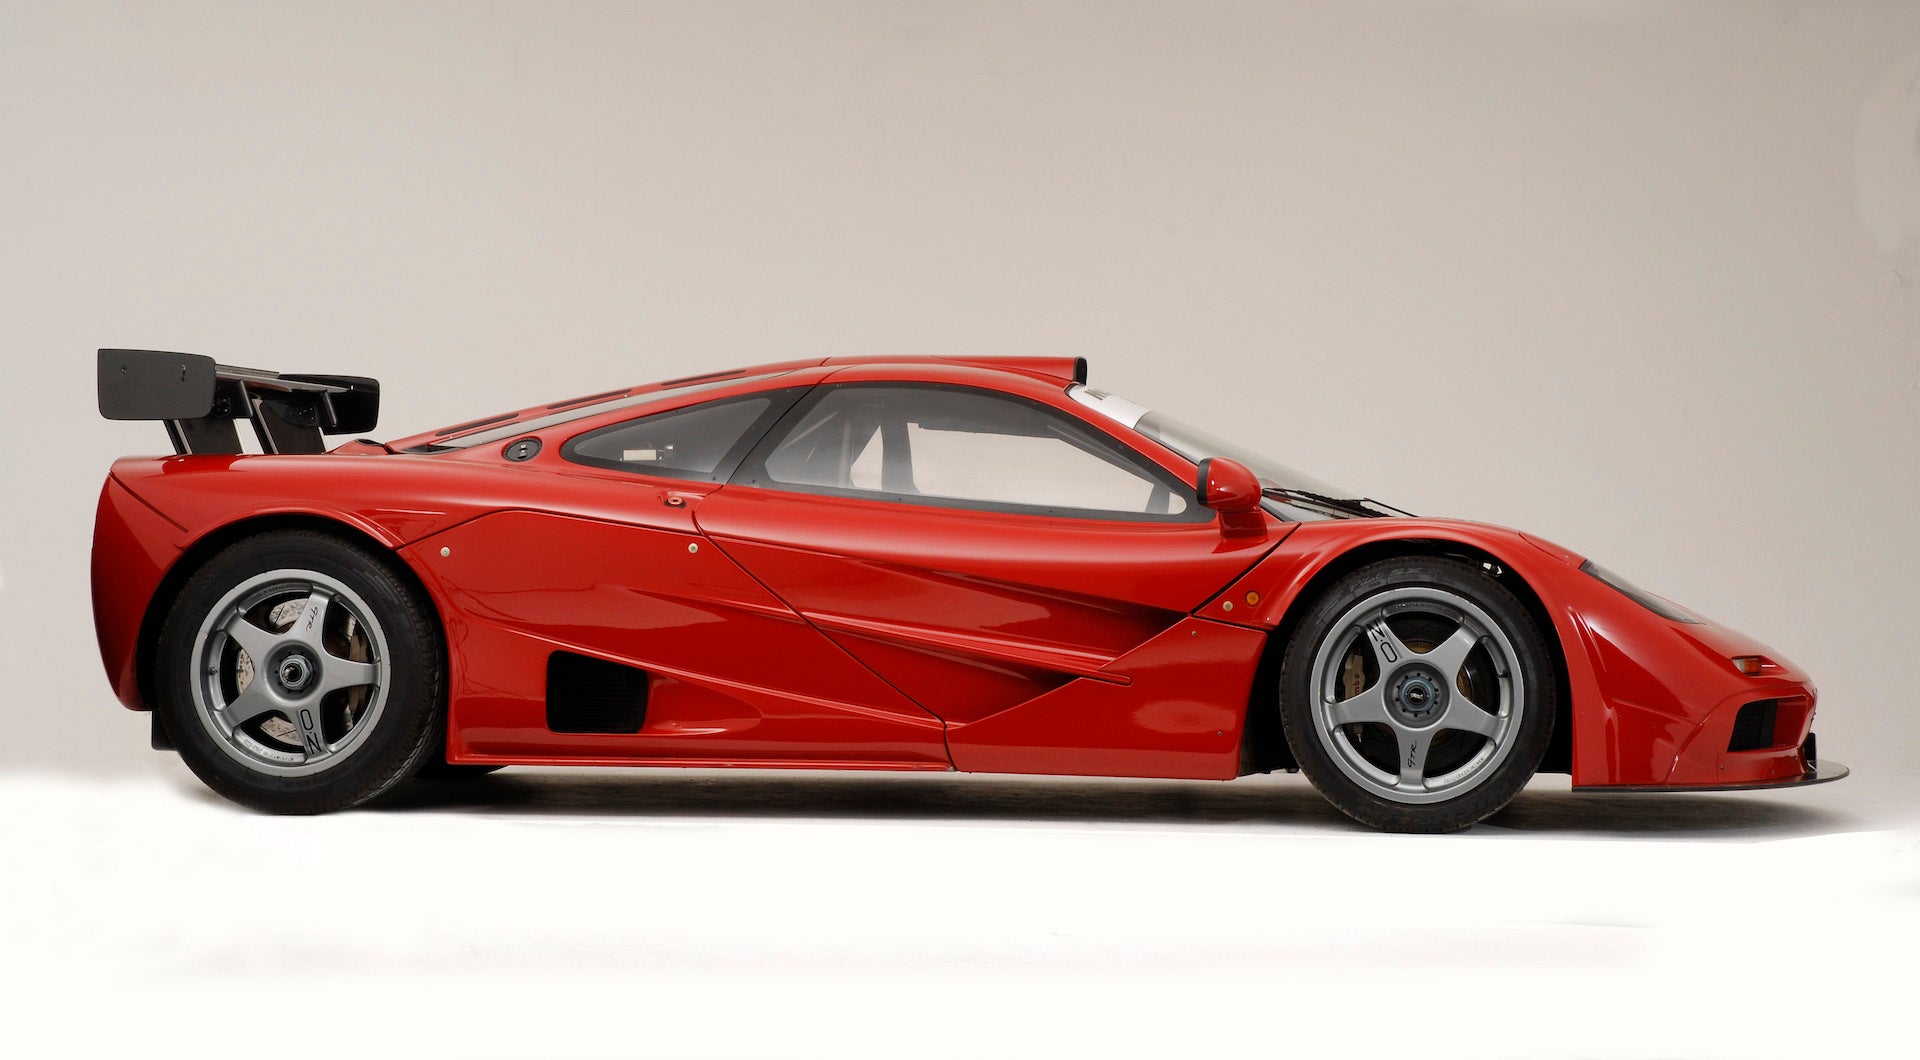 Here’s Where the Remaining McLaren F1 Supercars Live